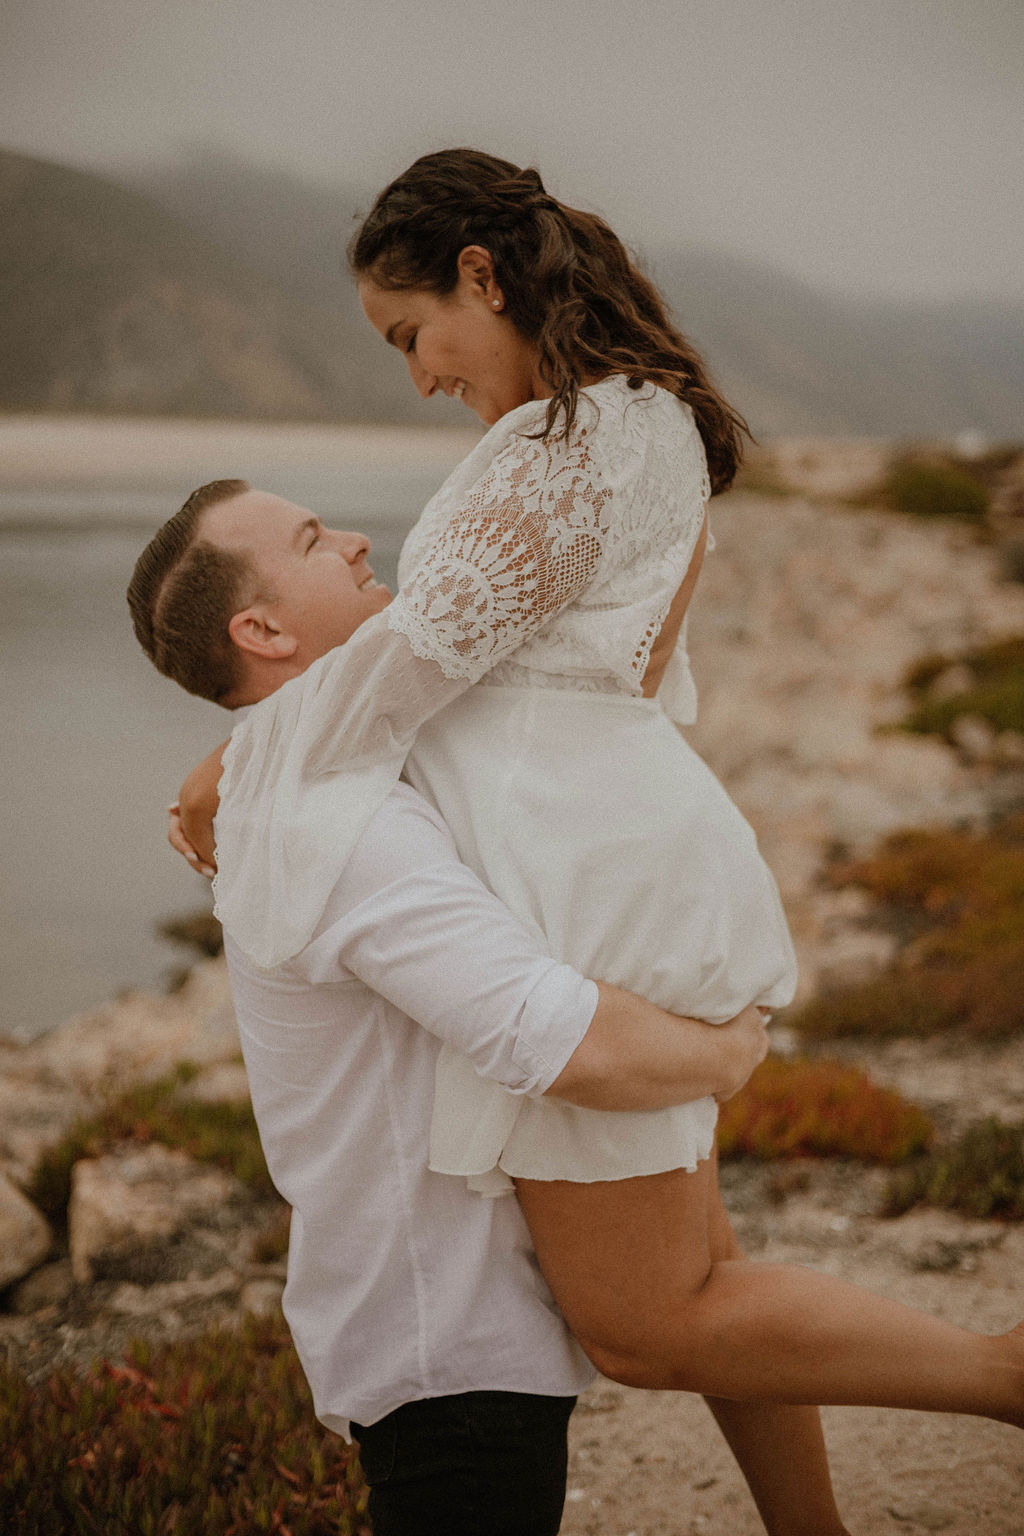 Fiance holding up her up as they gaze into each others eyes for the engagement photographer to capture